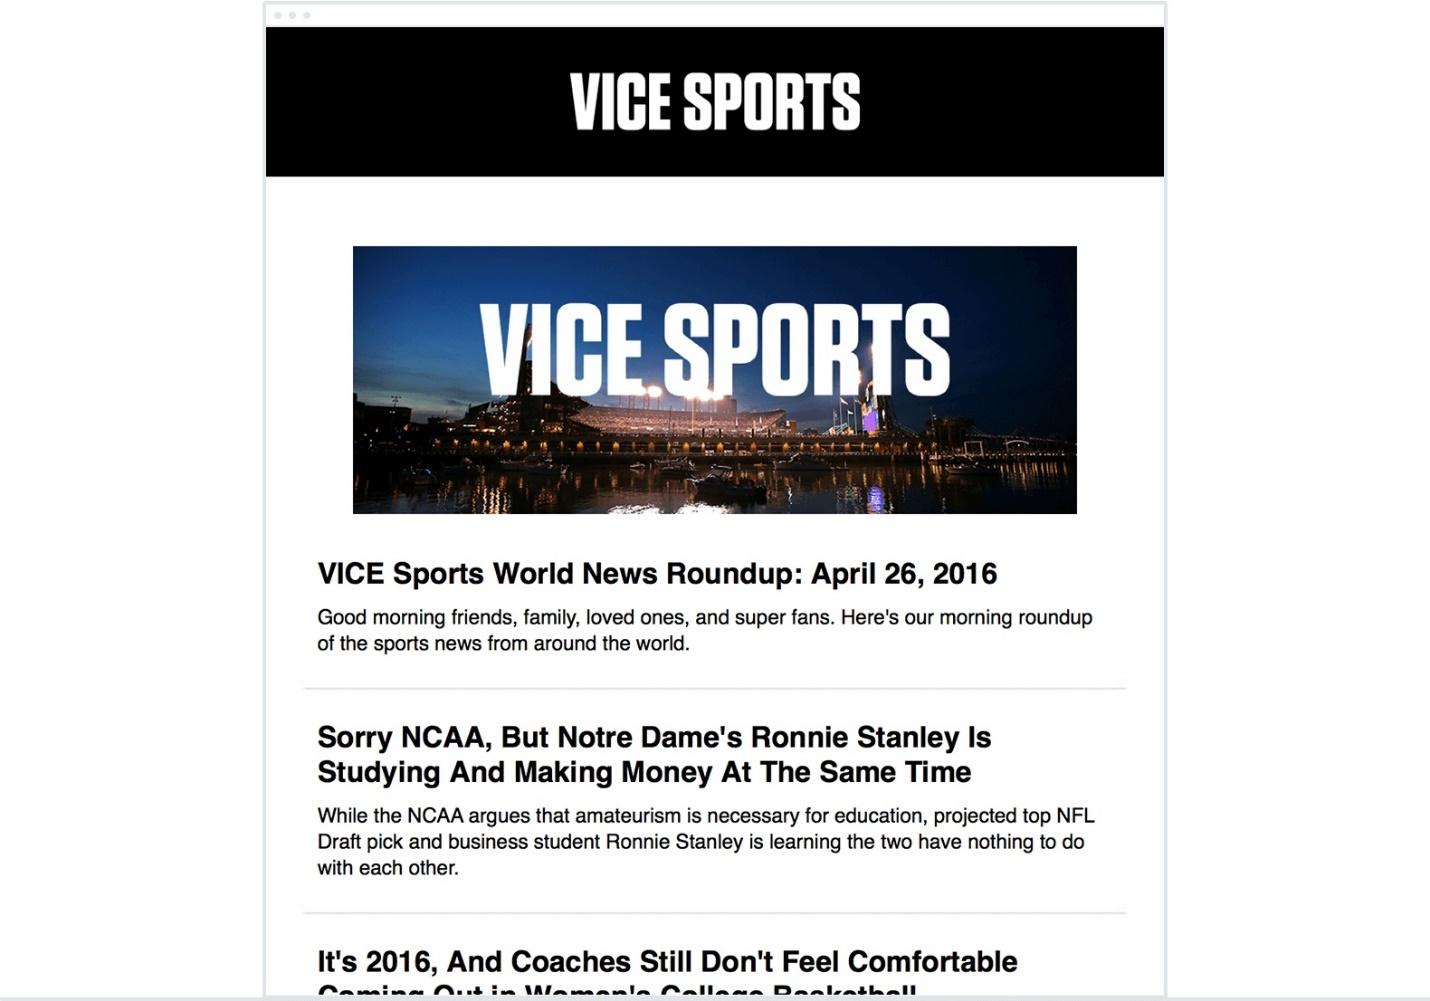 Take this example from Vice Sports—they include a variety of information that their readers may find interesting. What they don’t do is give it all away, enticing the reader to click the links to learn more.